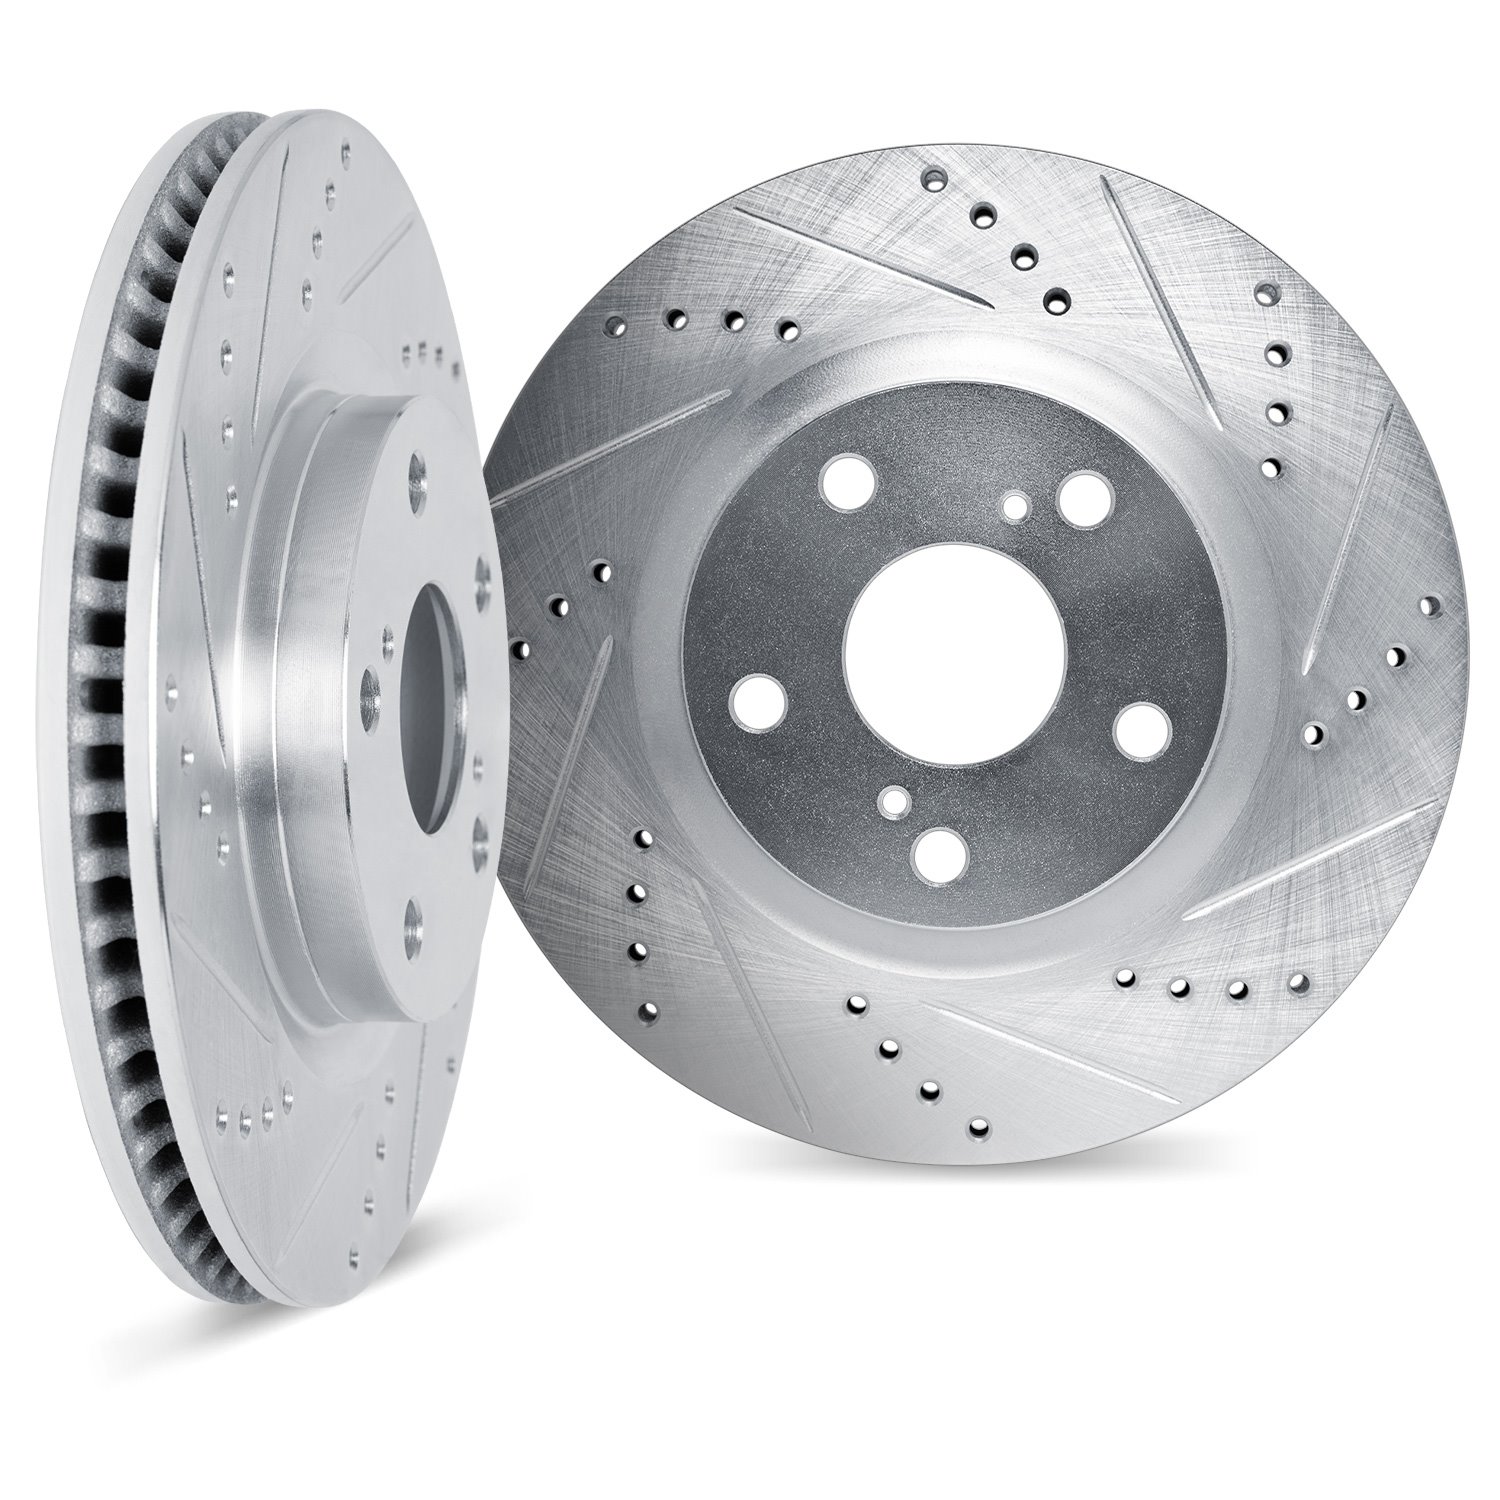 7002-31115 Drilled/Slotted Brake Rotors [Silver], Fits Select Multiple Makes/Models, Position: Rear